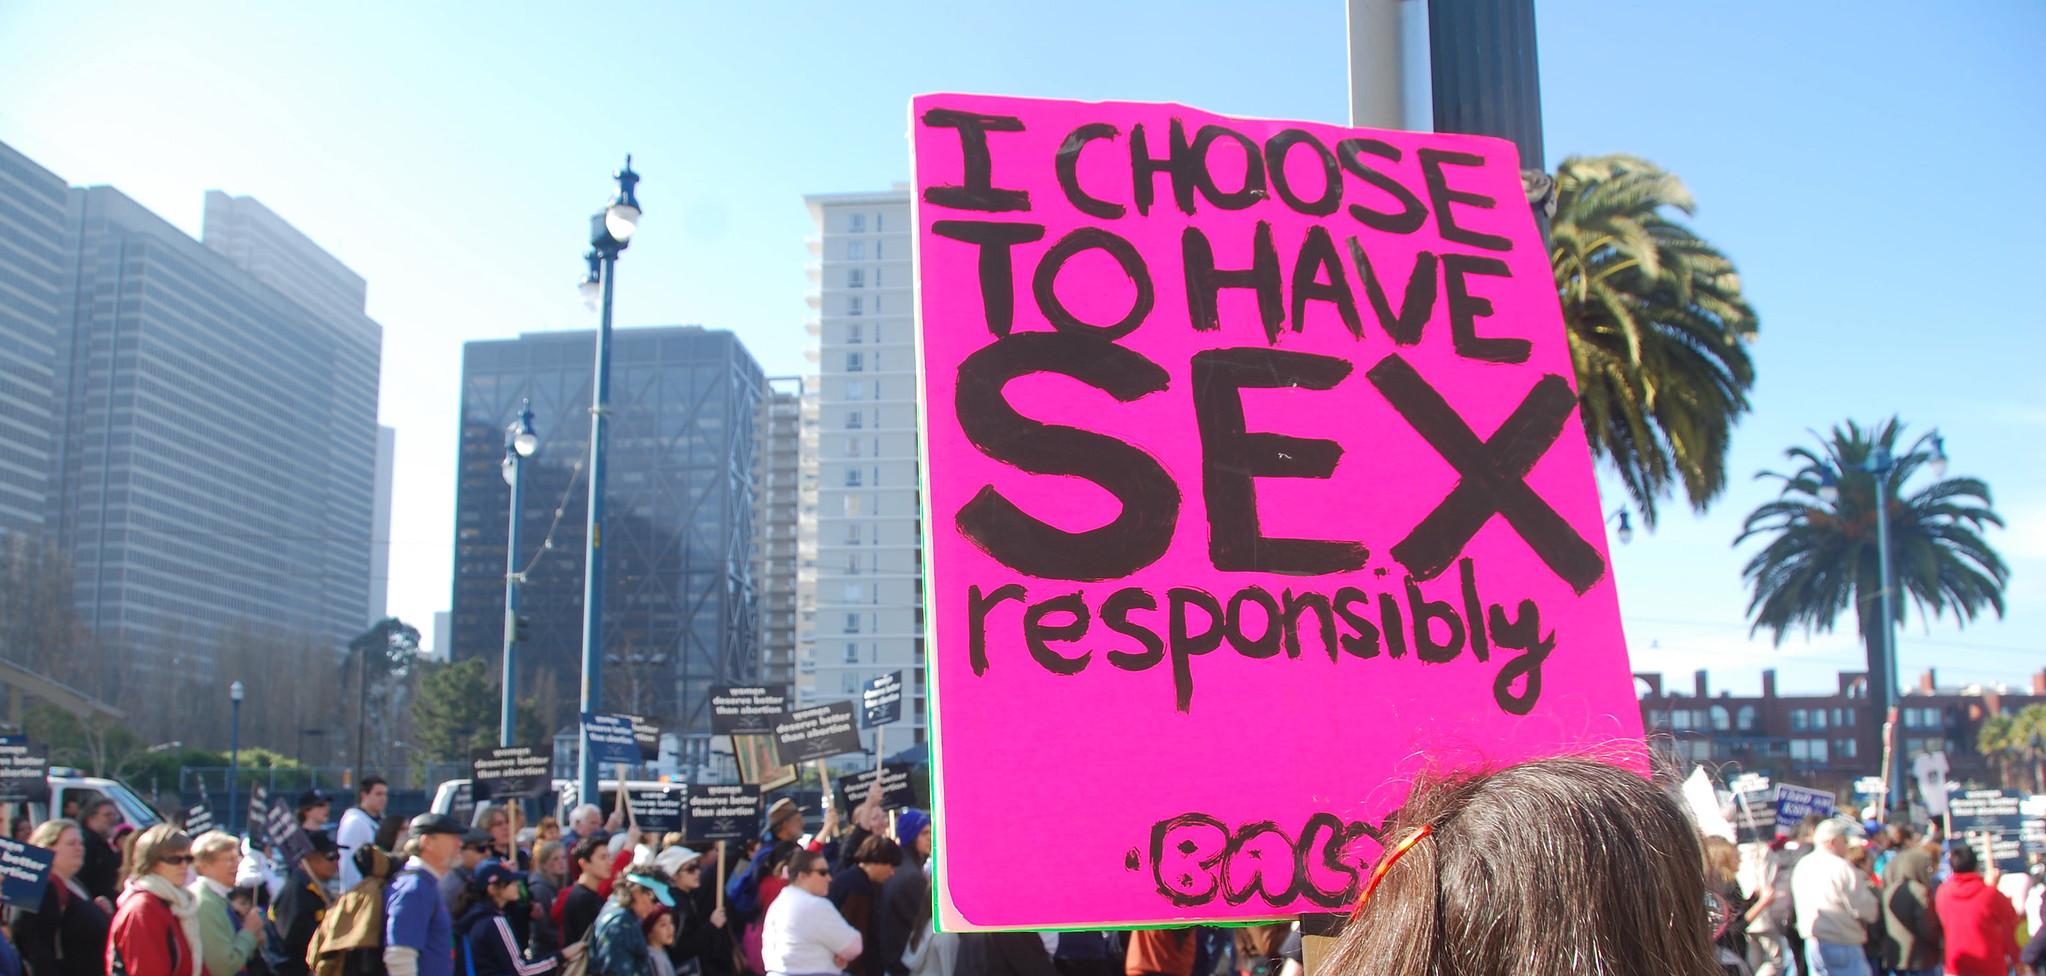 A person holding a sign that reads "I choose to have sex responsibly"